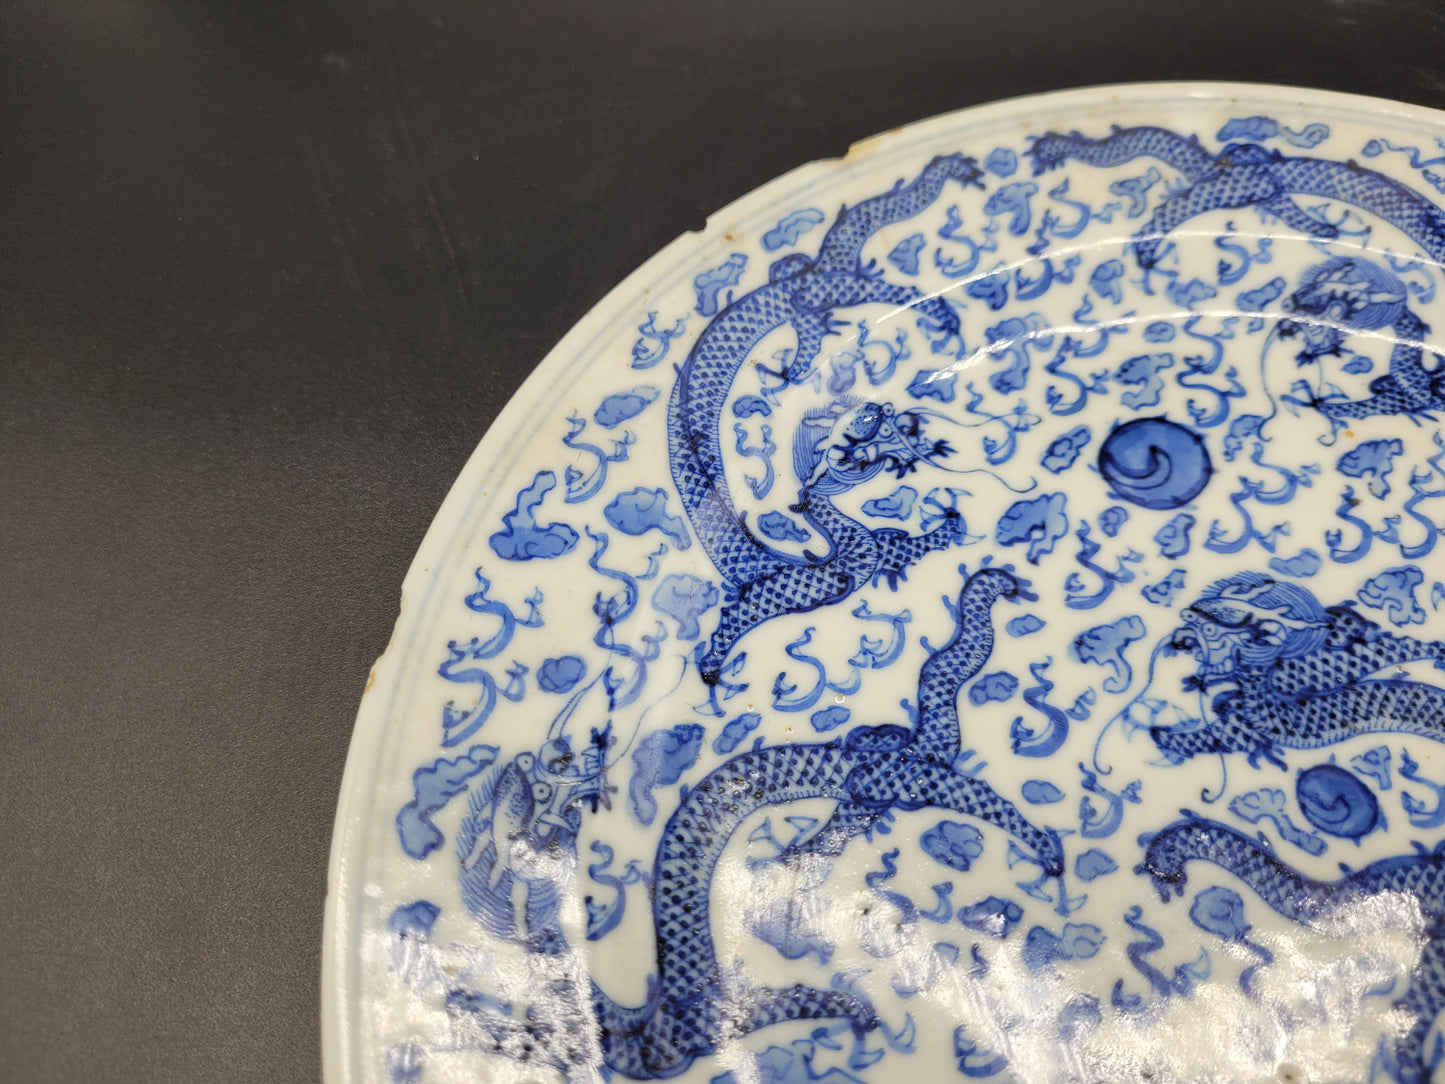 ANTIQUES ONLNE UK Beautiful Chinese Kangxi Period ( 1662-1722 ) Blue and White Dragon Plate 